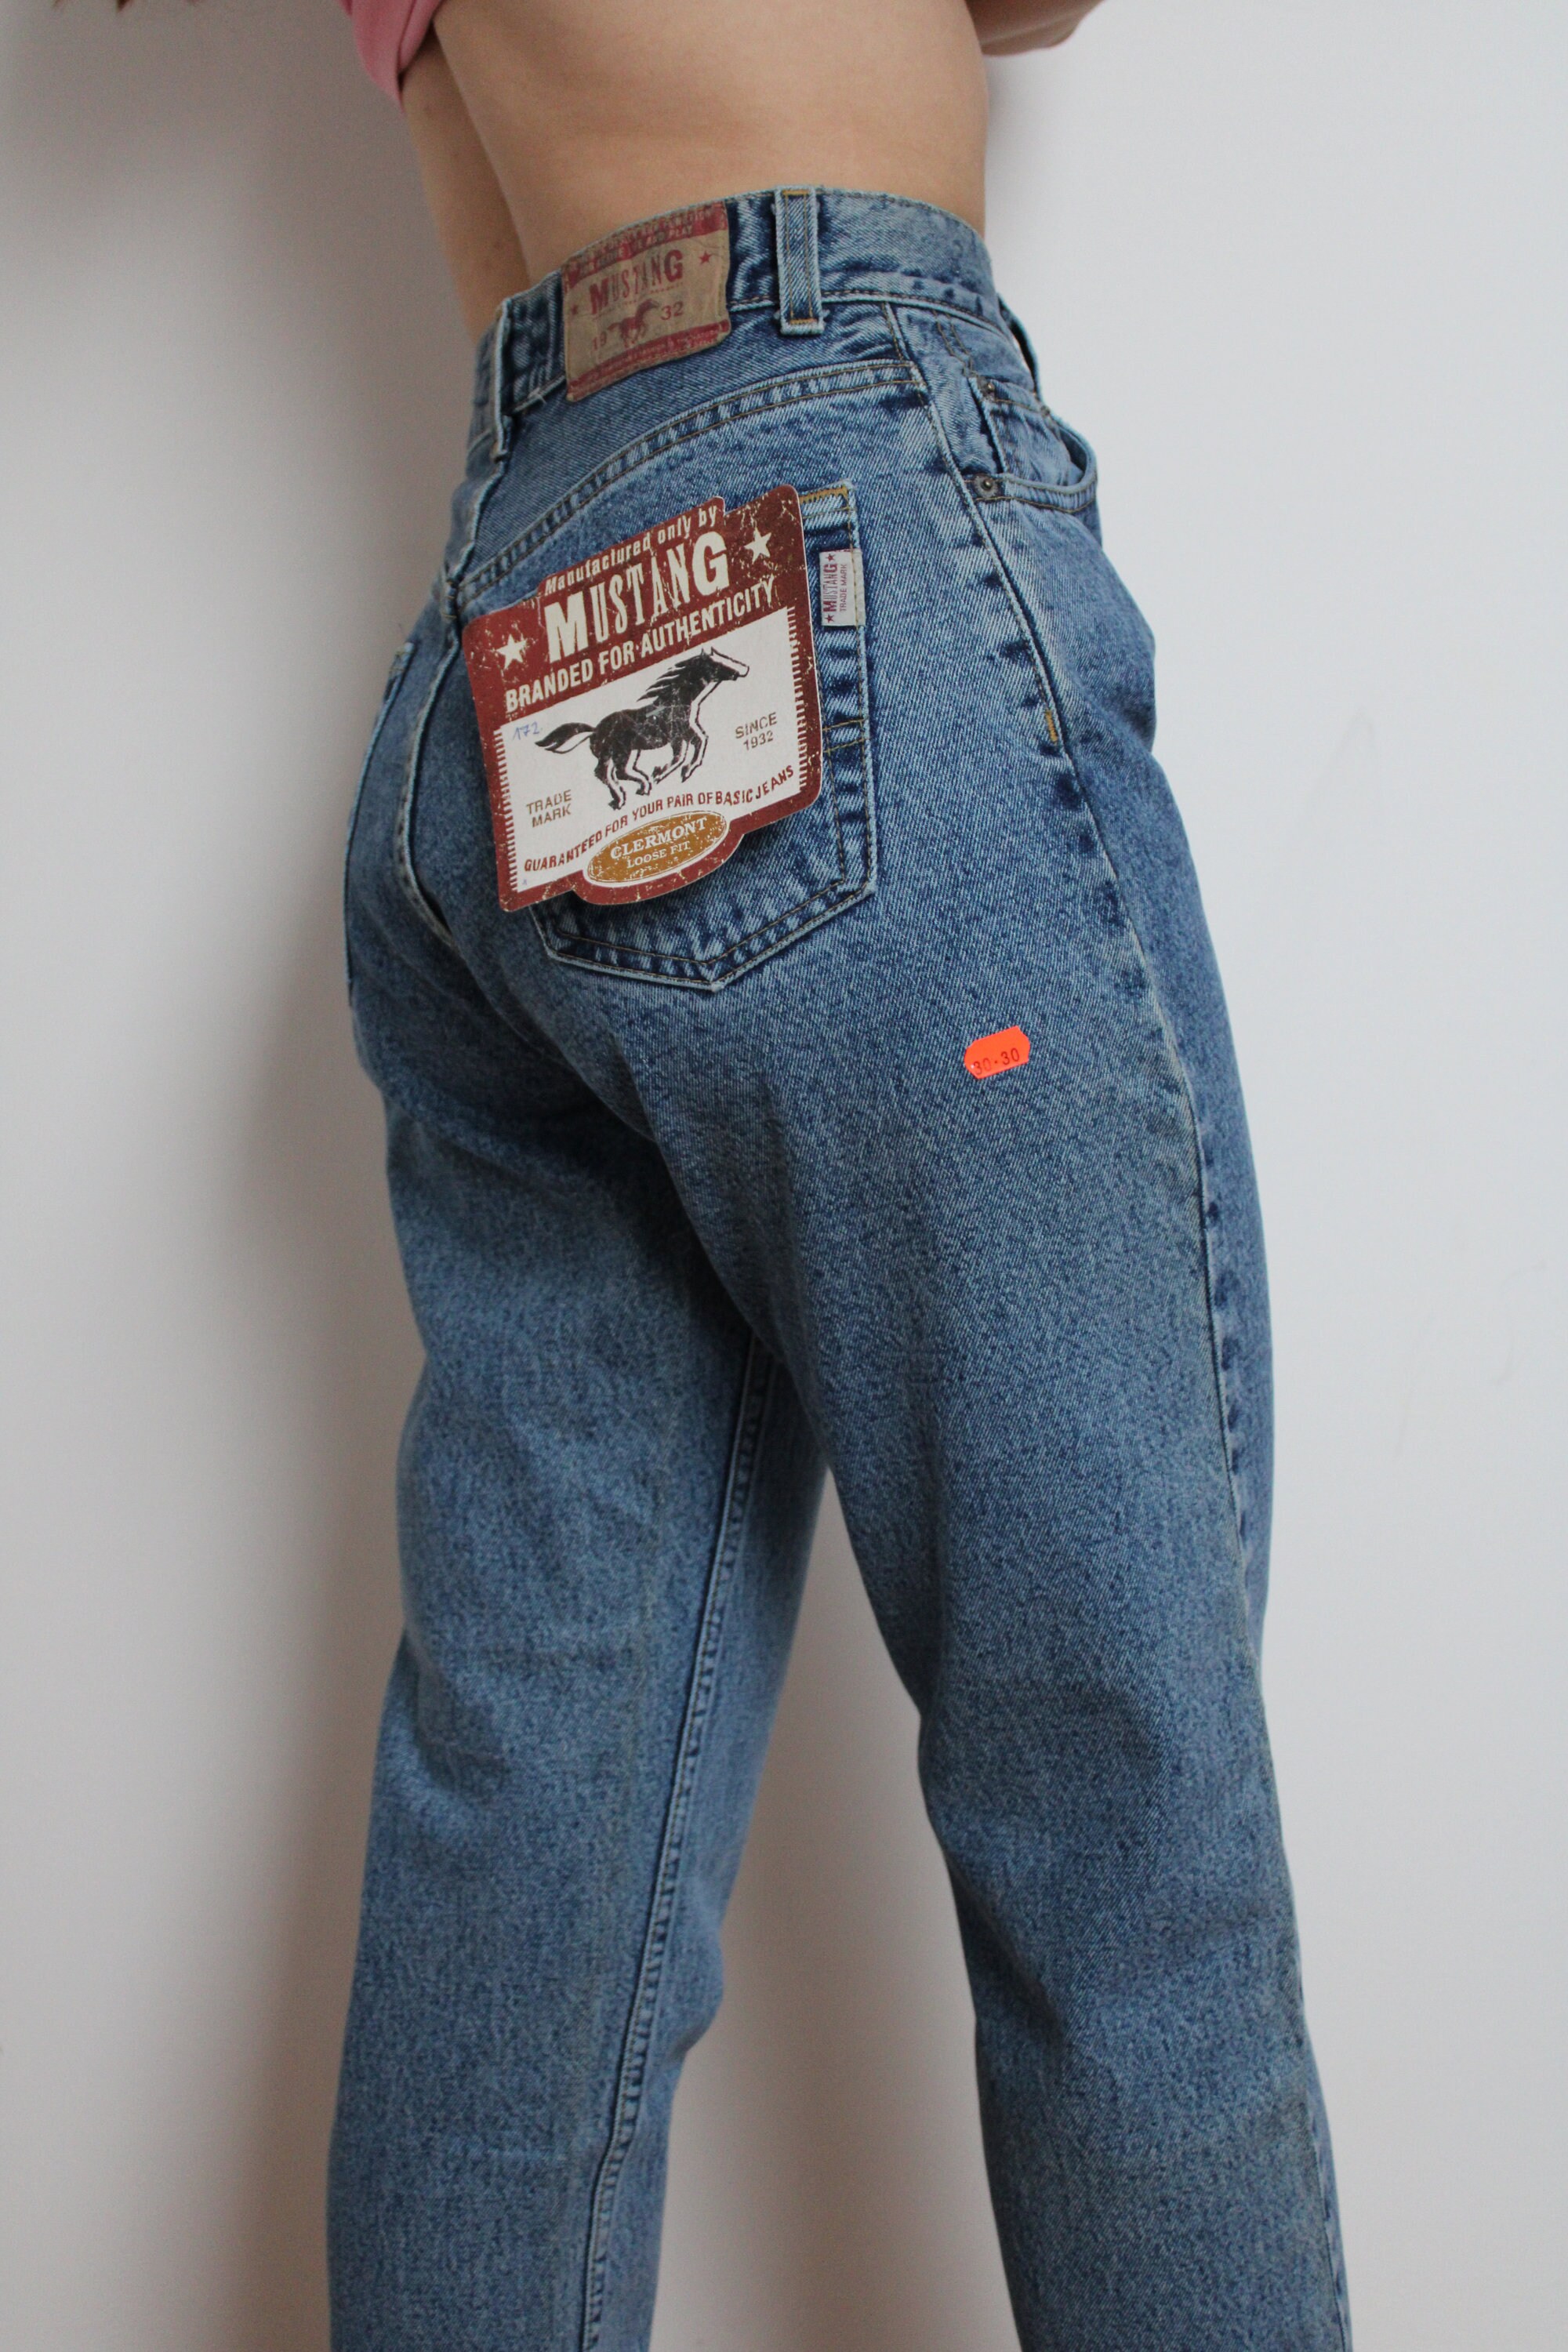 Size With New 28-29 Stonewash Mom Mom Etsy / / Tags - Jeans Jeans Women Vintage Mom Jeans Brand /